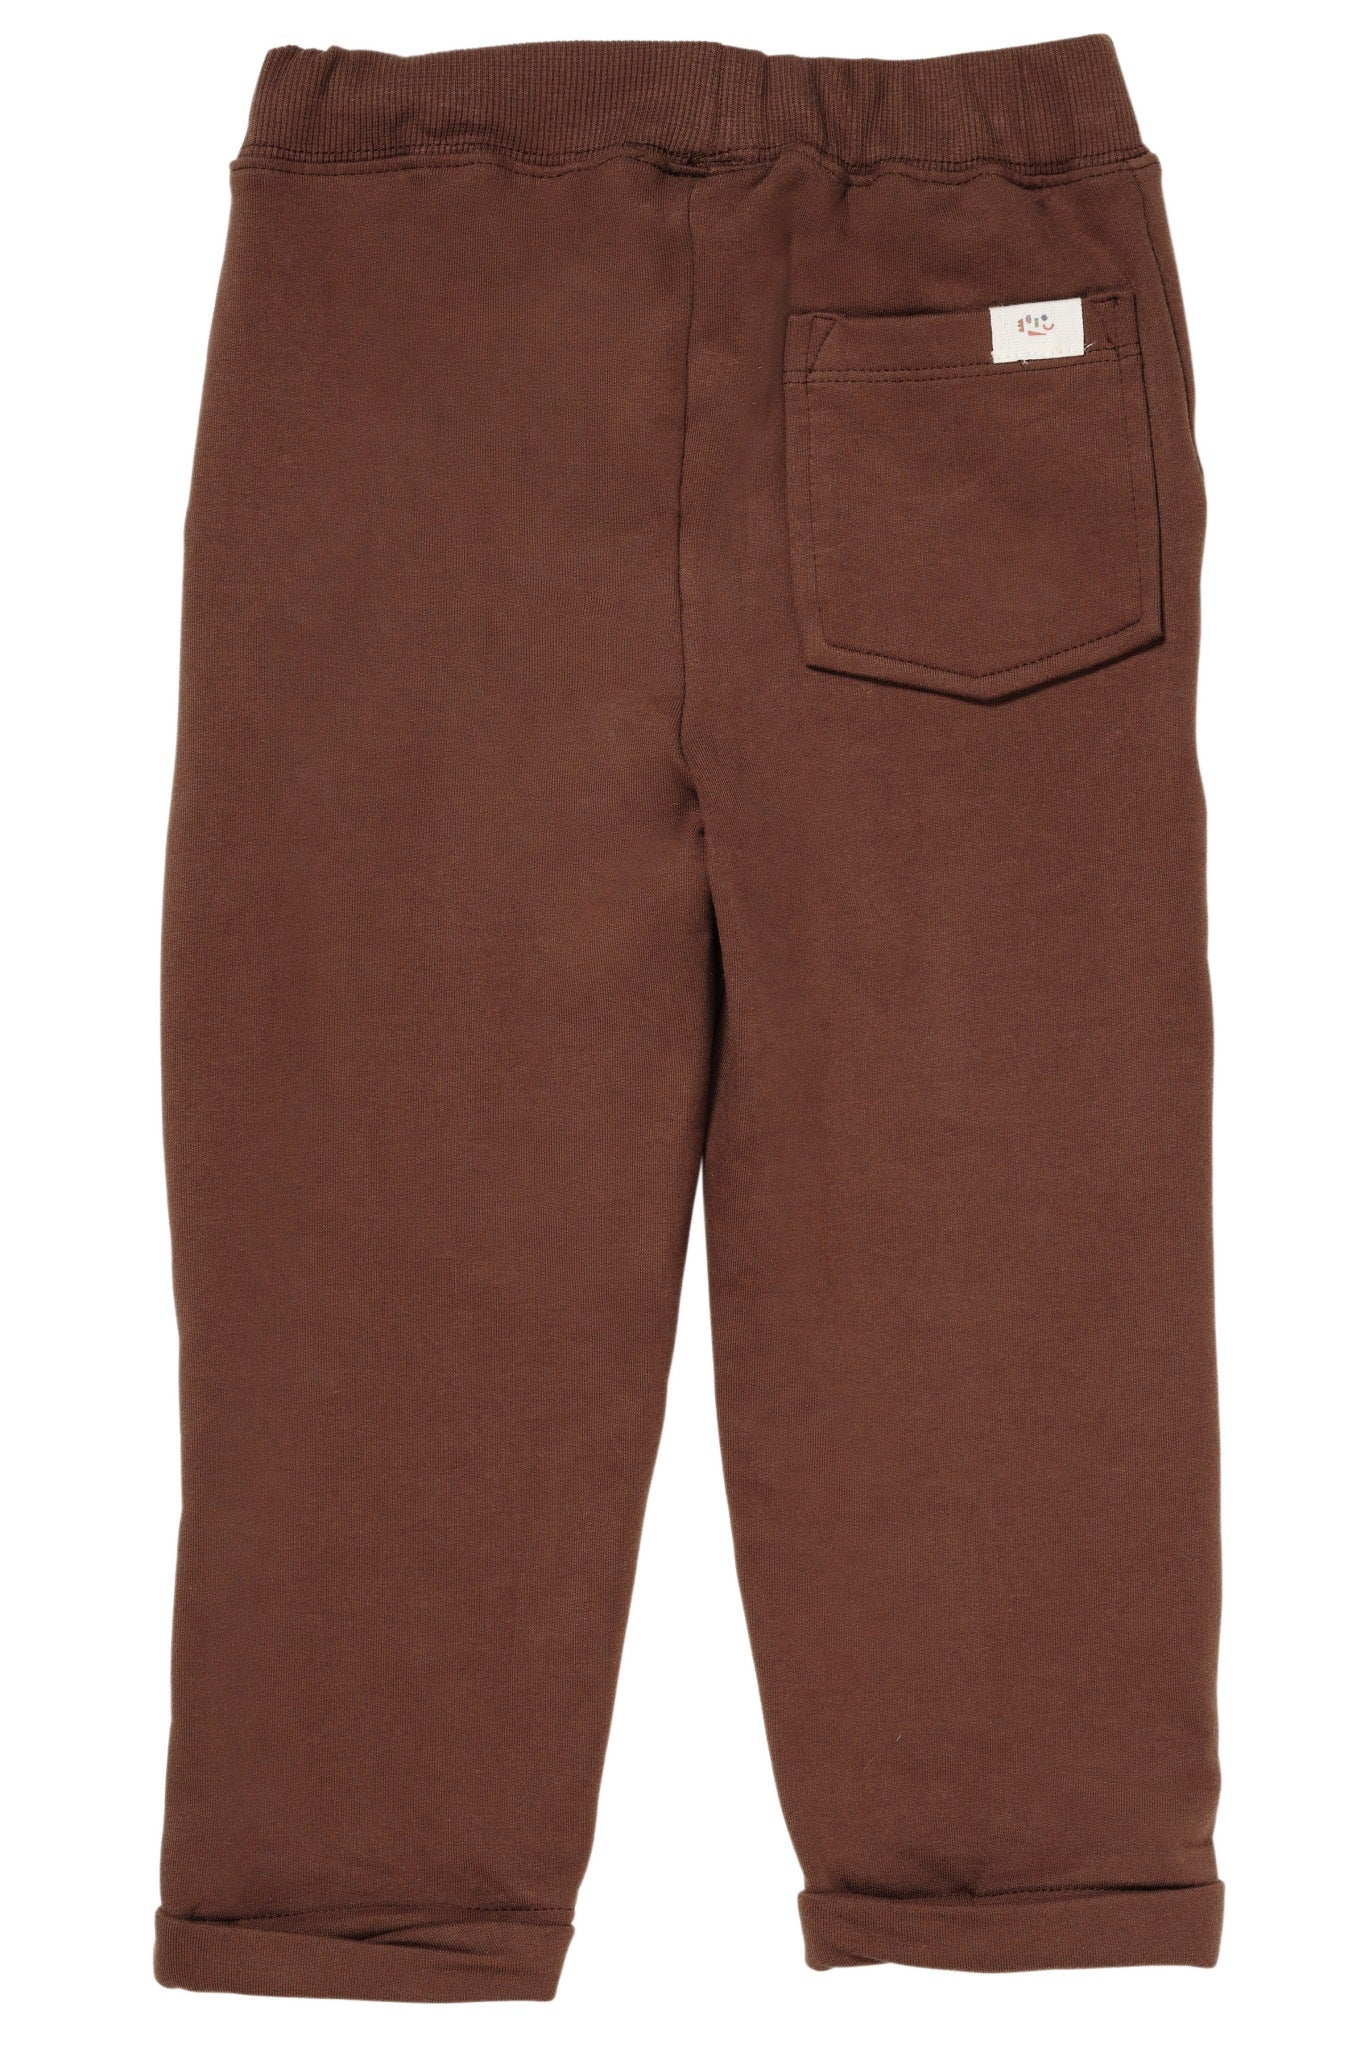 SWEAT SUITED PANTS BRUSHED - CHOCOLATE